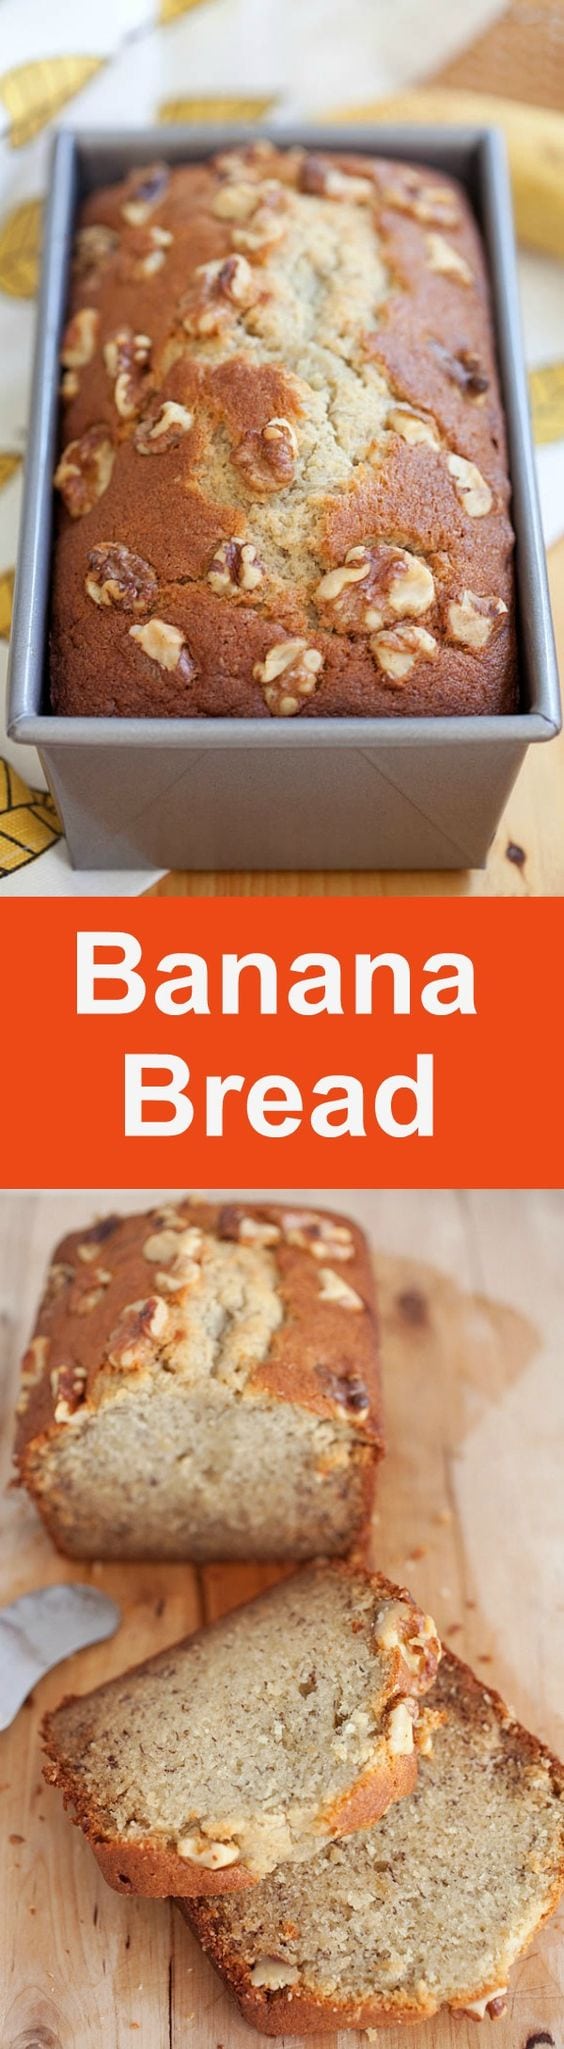 Banana bread – best homemade banana bread recipe ever! Moist, buttery, aromatic and packed with bananas and topped with walnuts. | rasamalaysia.com